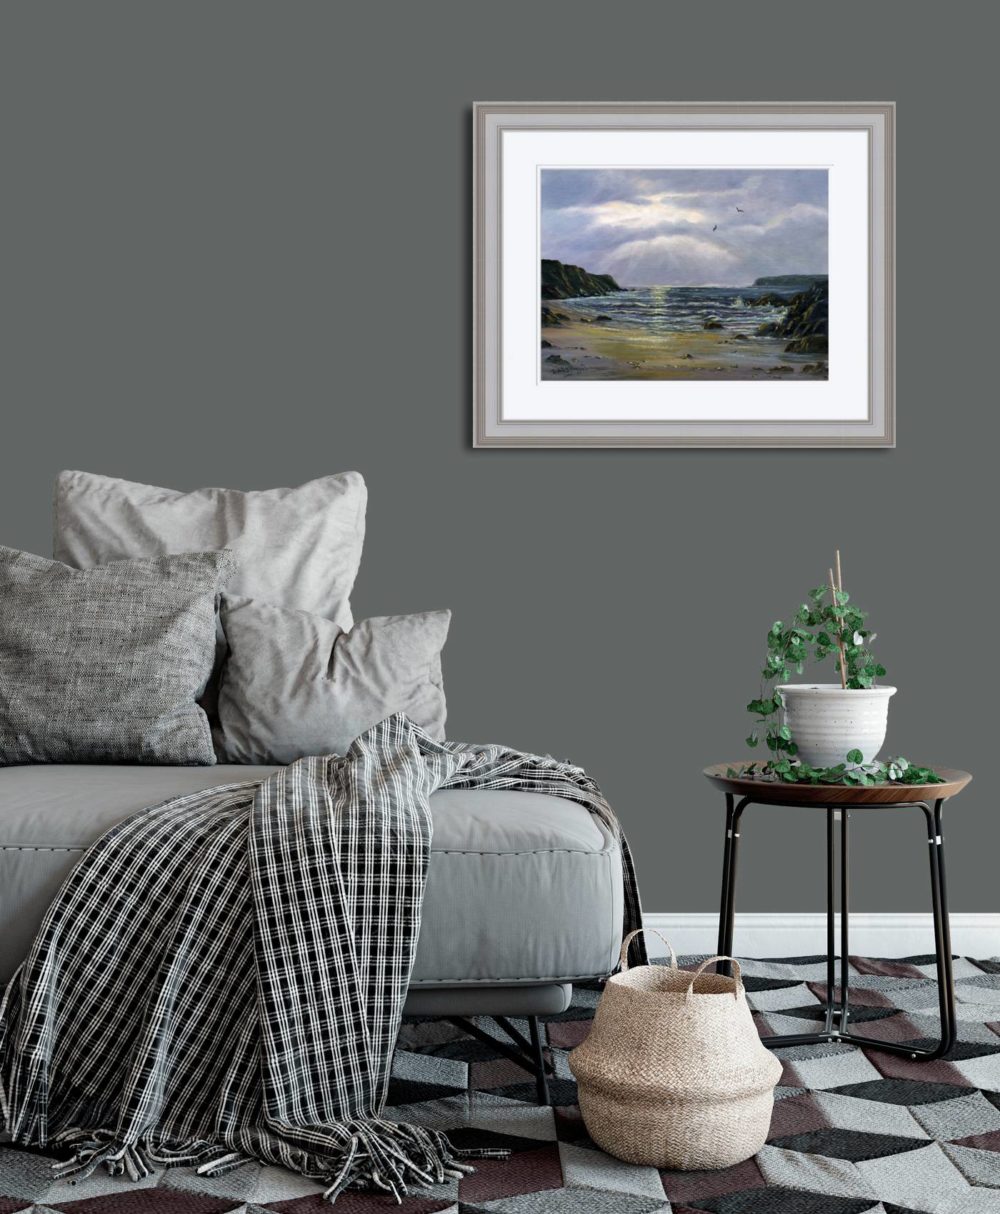 Evening On The North Coast Print (Medium) In Grey Frame In Room